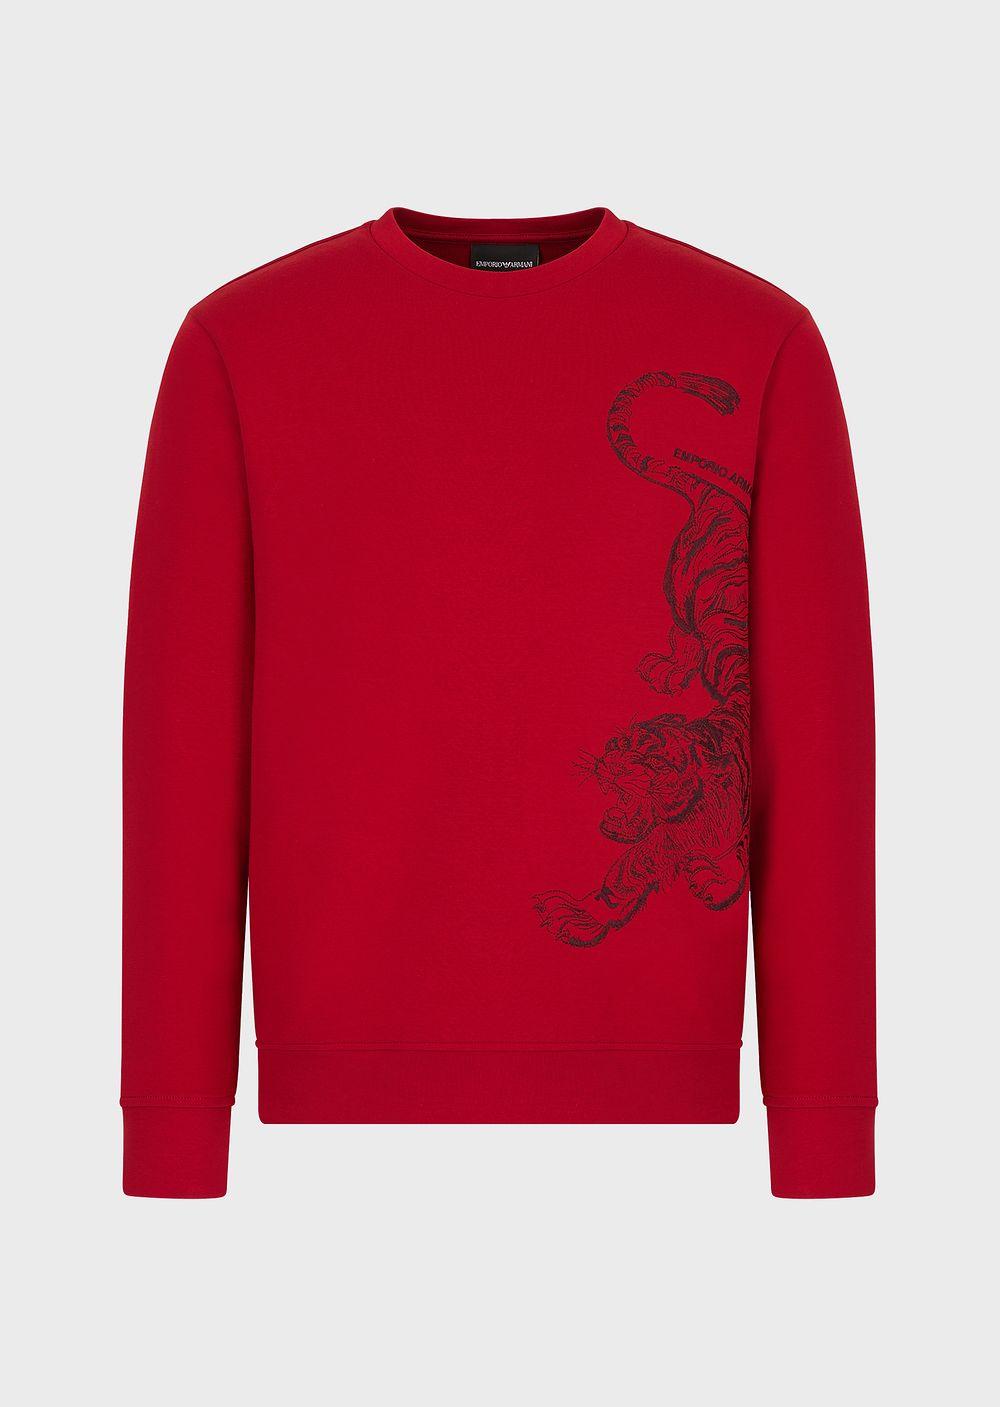 Emporio Armani Sweatshirt With Oversized Chinese New Year Tiger Embroidery  in Red for Men | Lyst